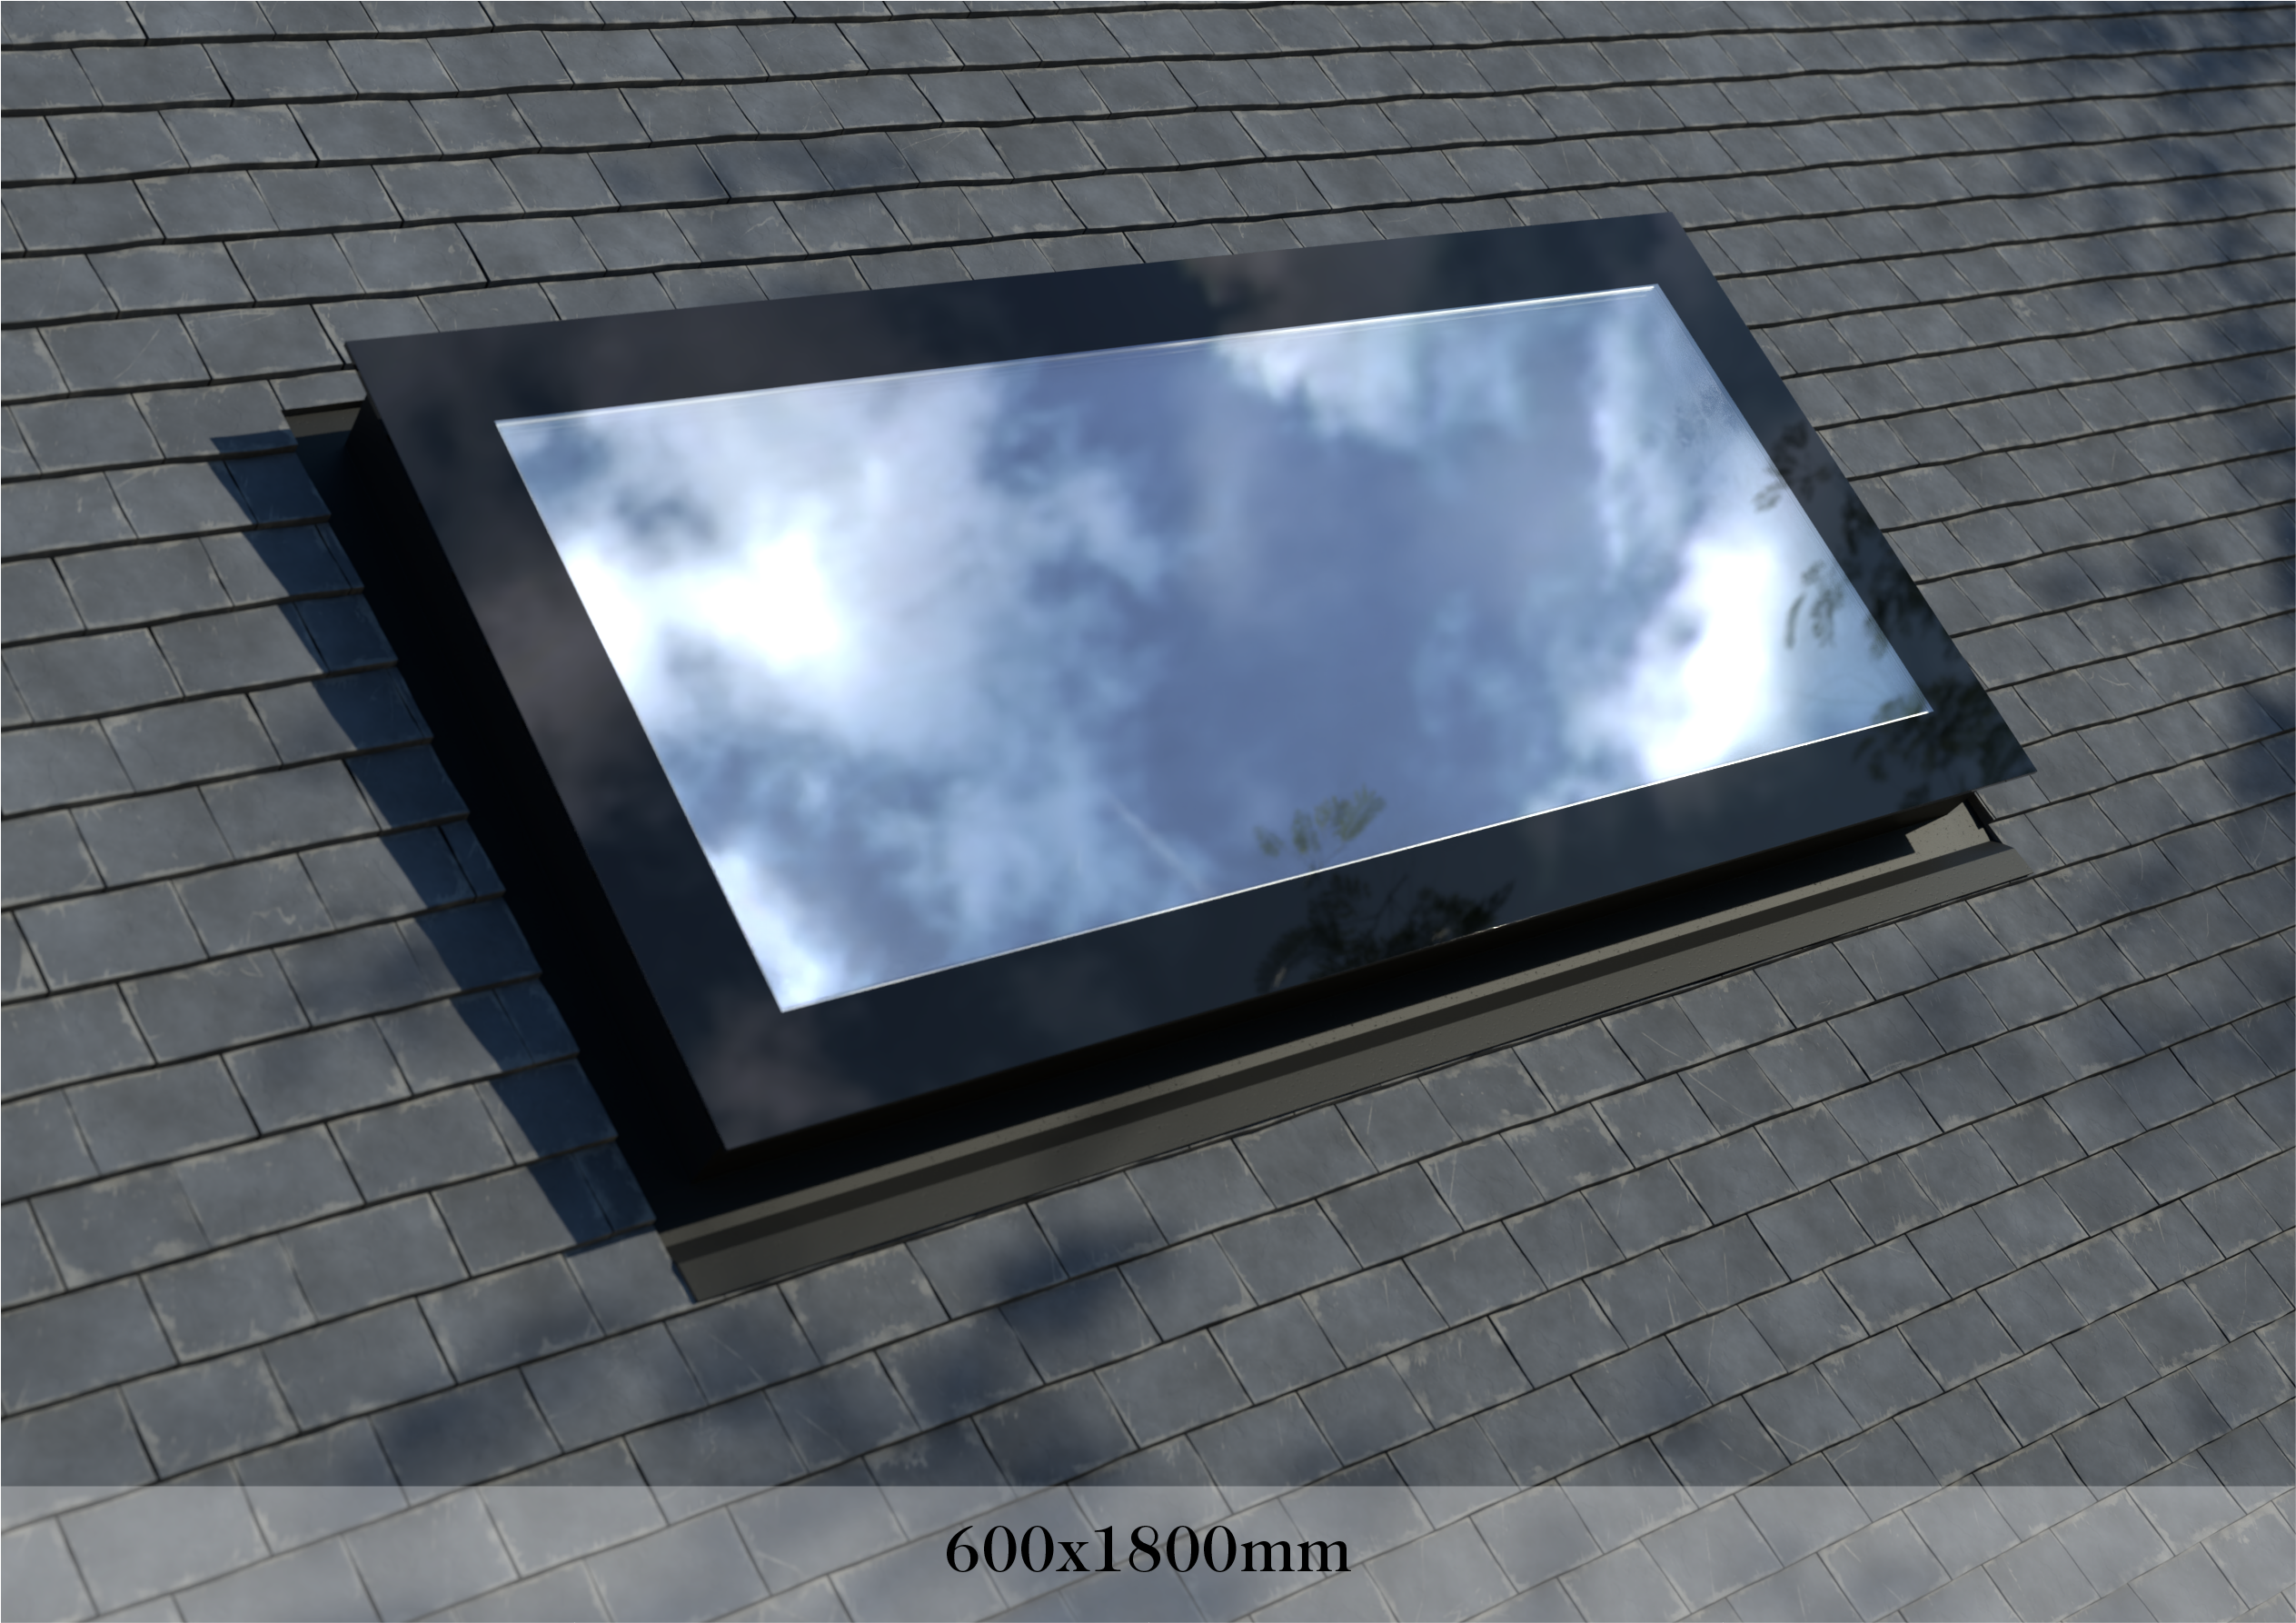 Pitched Roof Skylight 600 x 1800mm